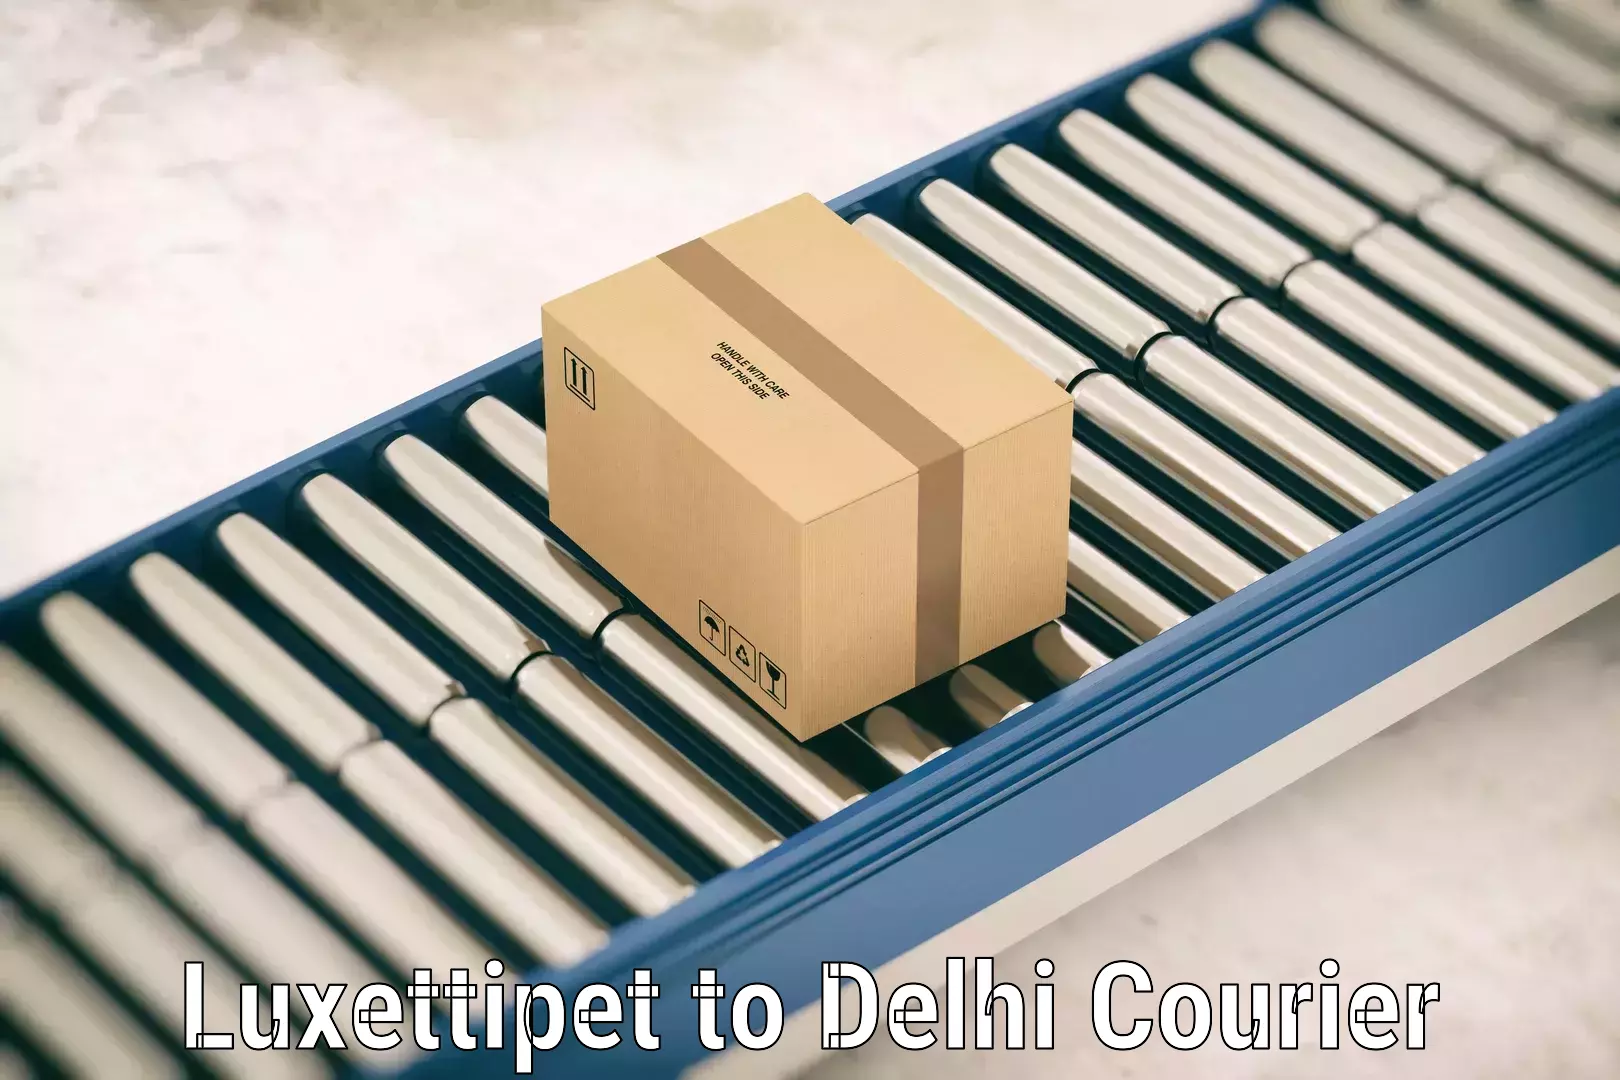 Online luggage shipping booking Luxettipet to Delhi